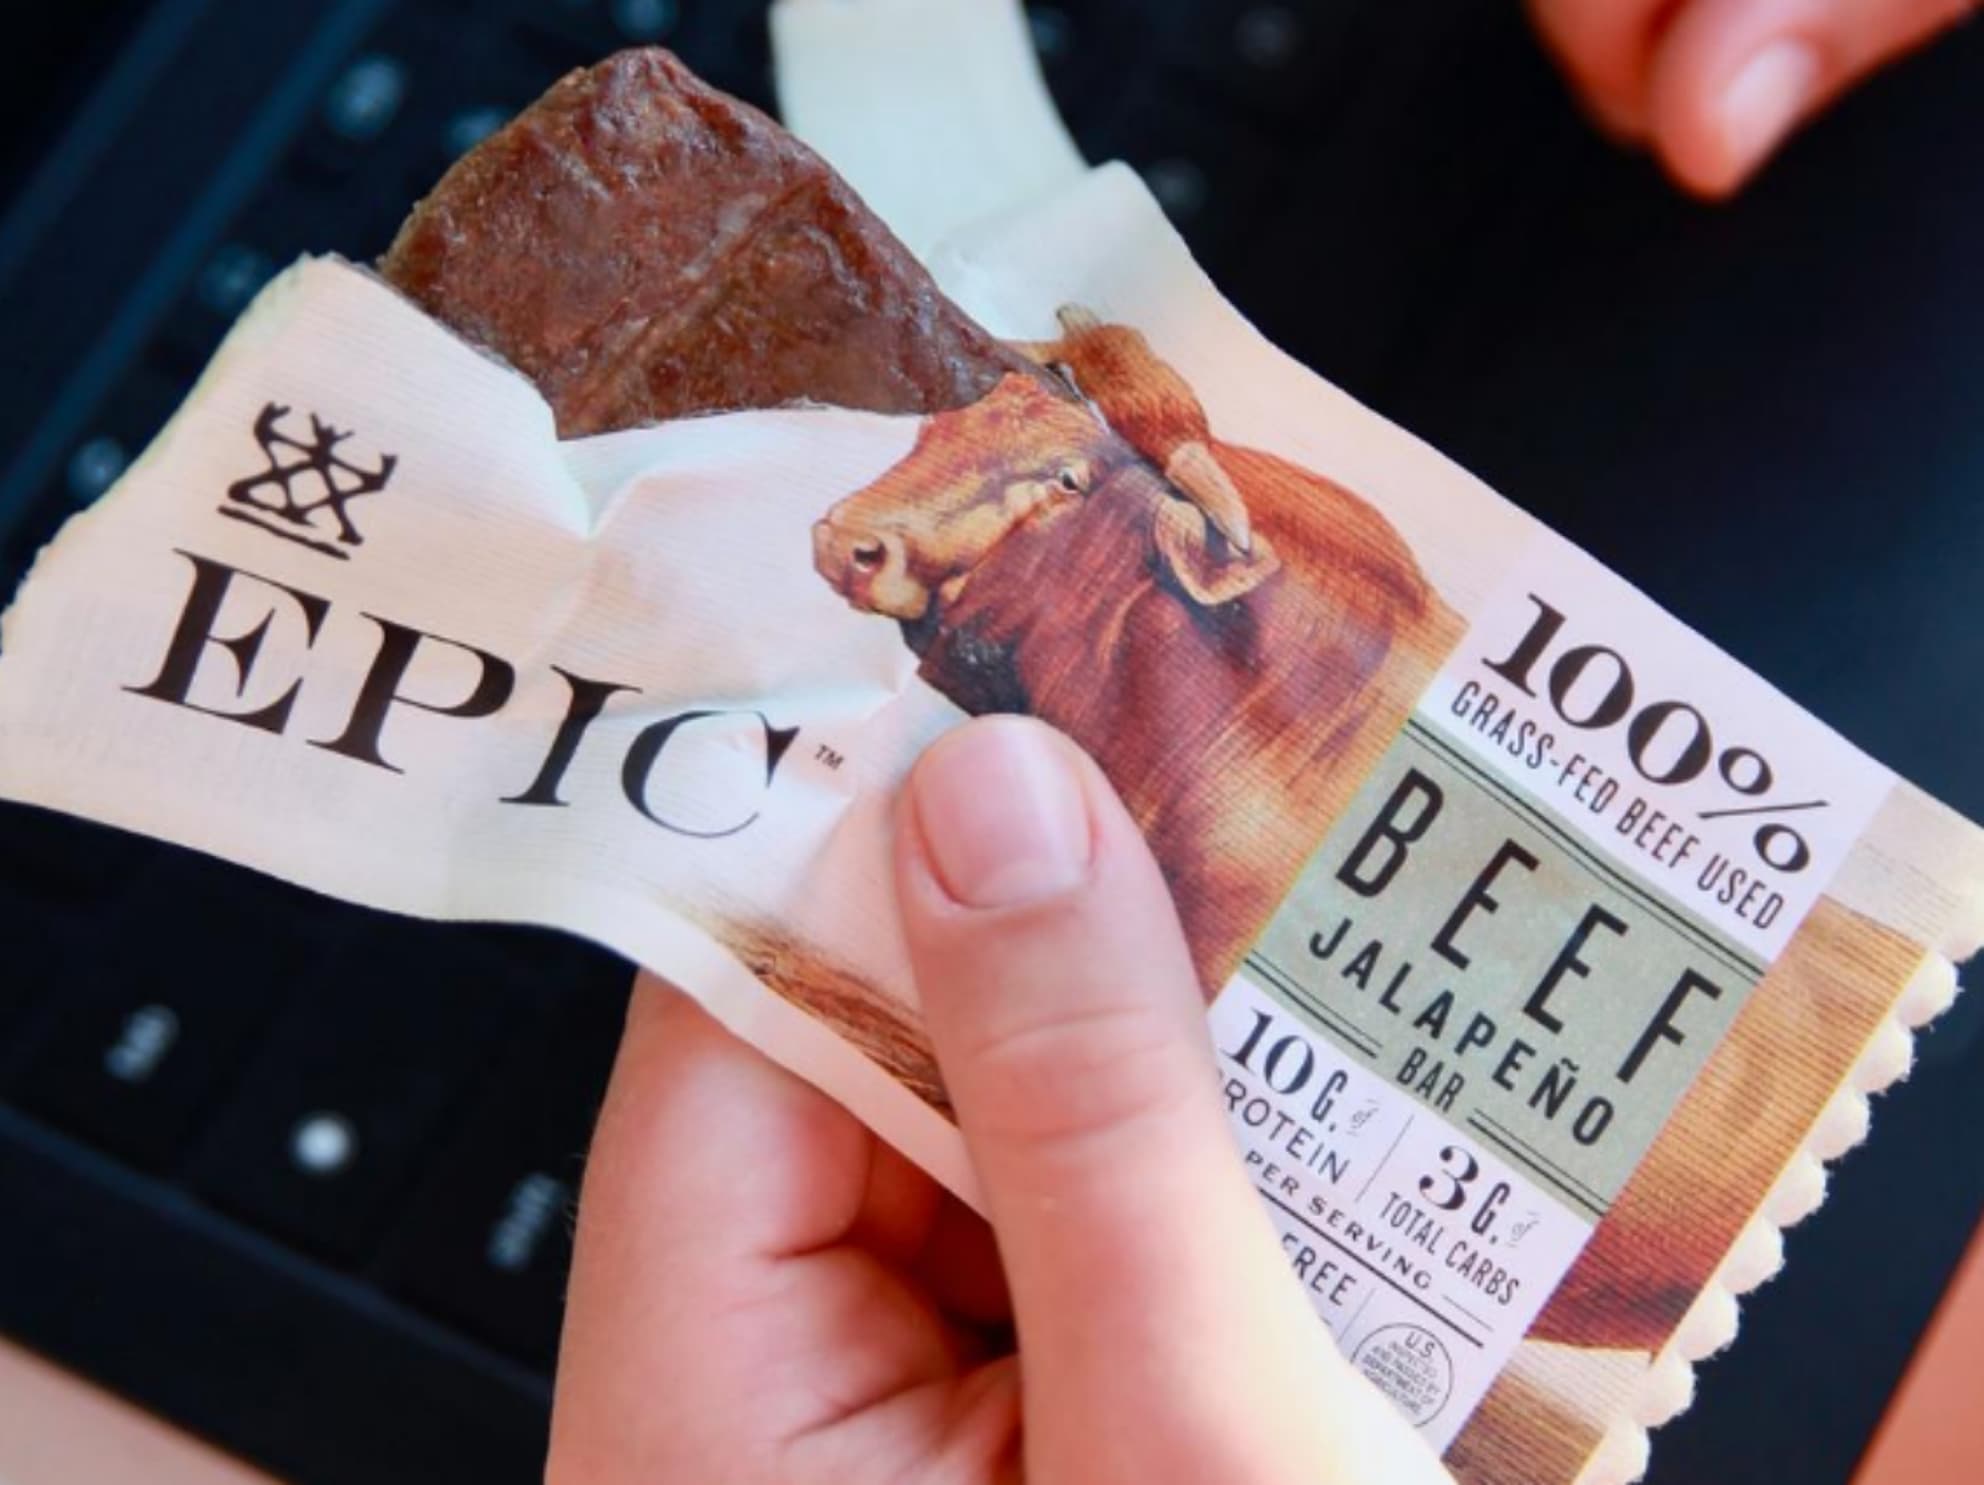 EPIC beef jalapeno bar in hand